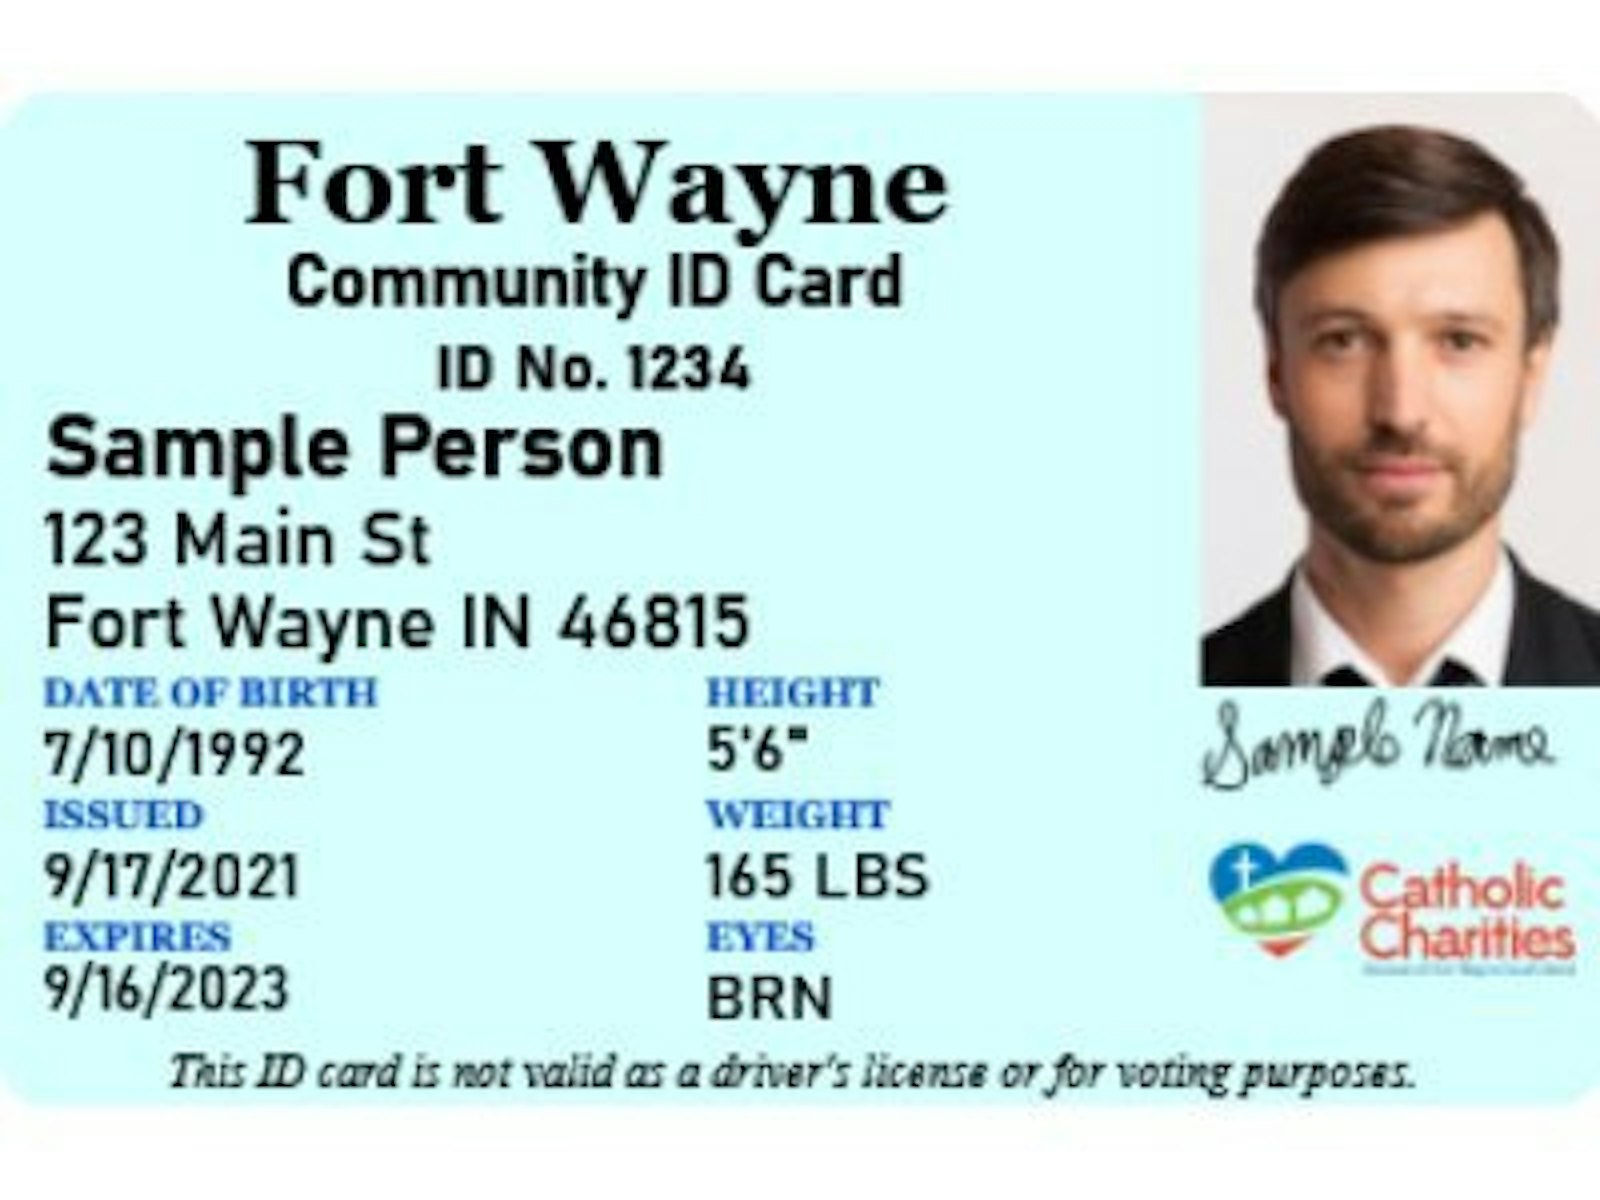 This is an example of a new ID card developed by Catholic Charities in the Diocese of Fort Wayne-South Bend, Ind. Agency officials said they hope the card will provide immigrants, the homeless and others in need a way to access city services. (CNS photo/Nicole Kurut, Catholic Charities courtesy Today's Catholic)